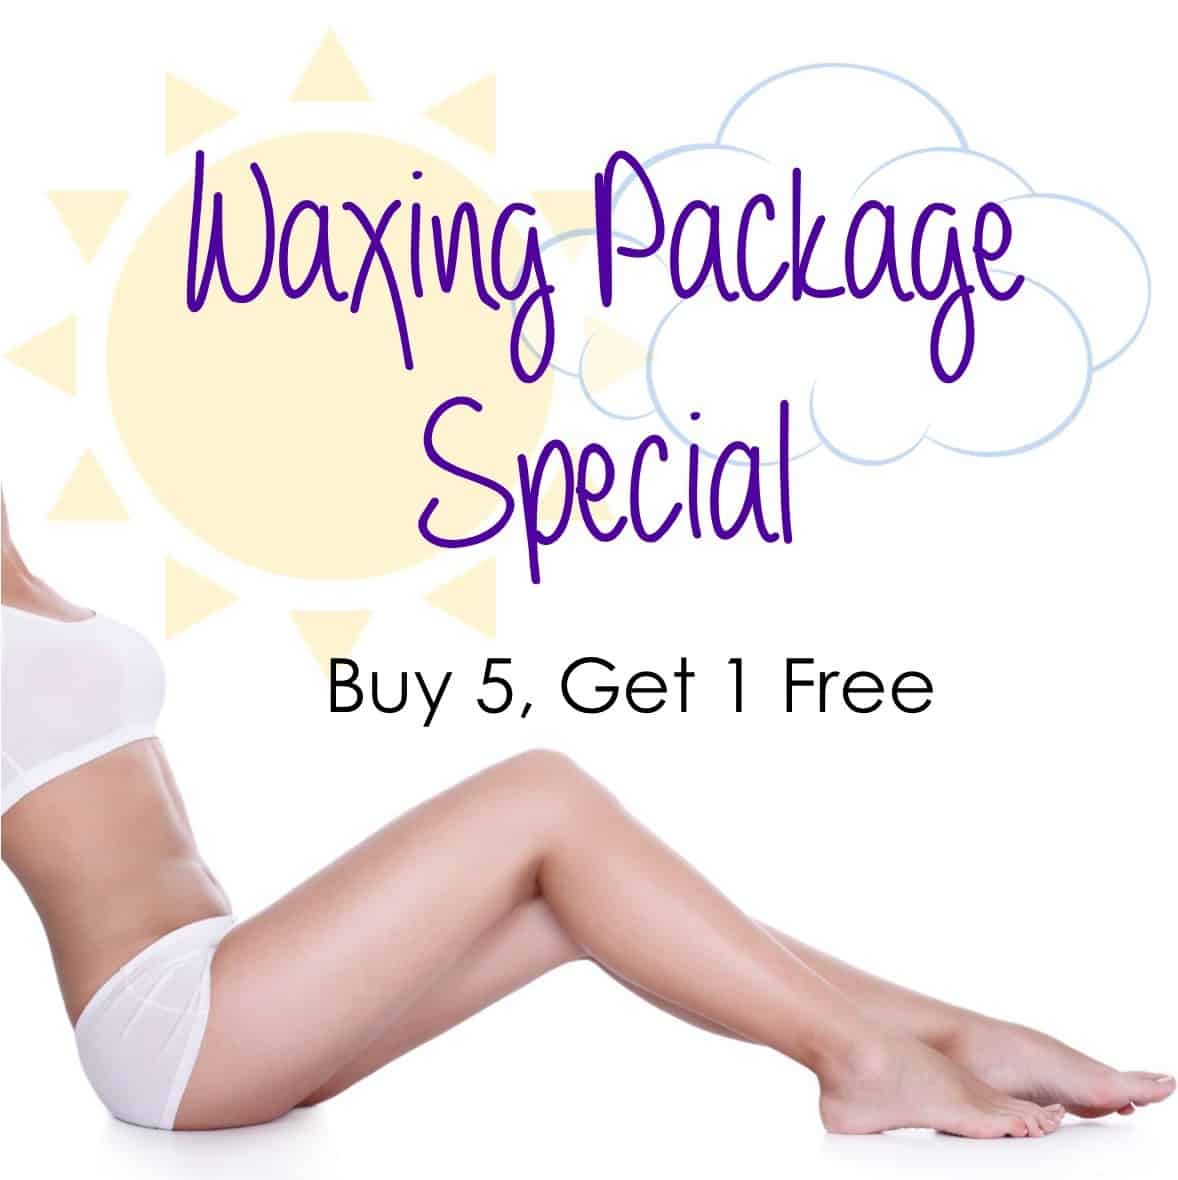 waxing package special